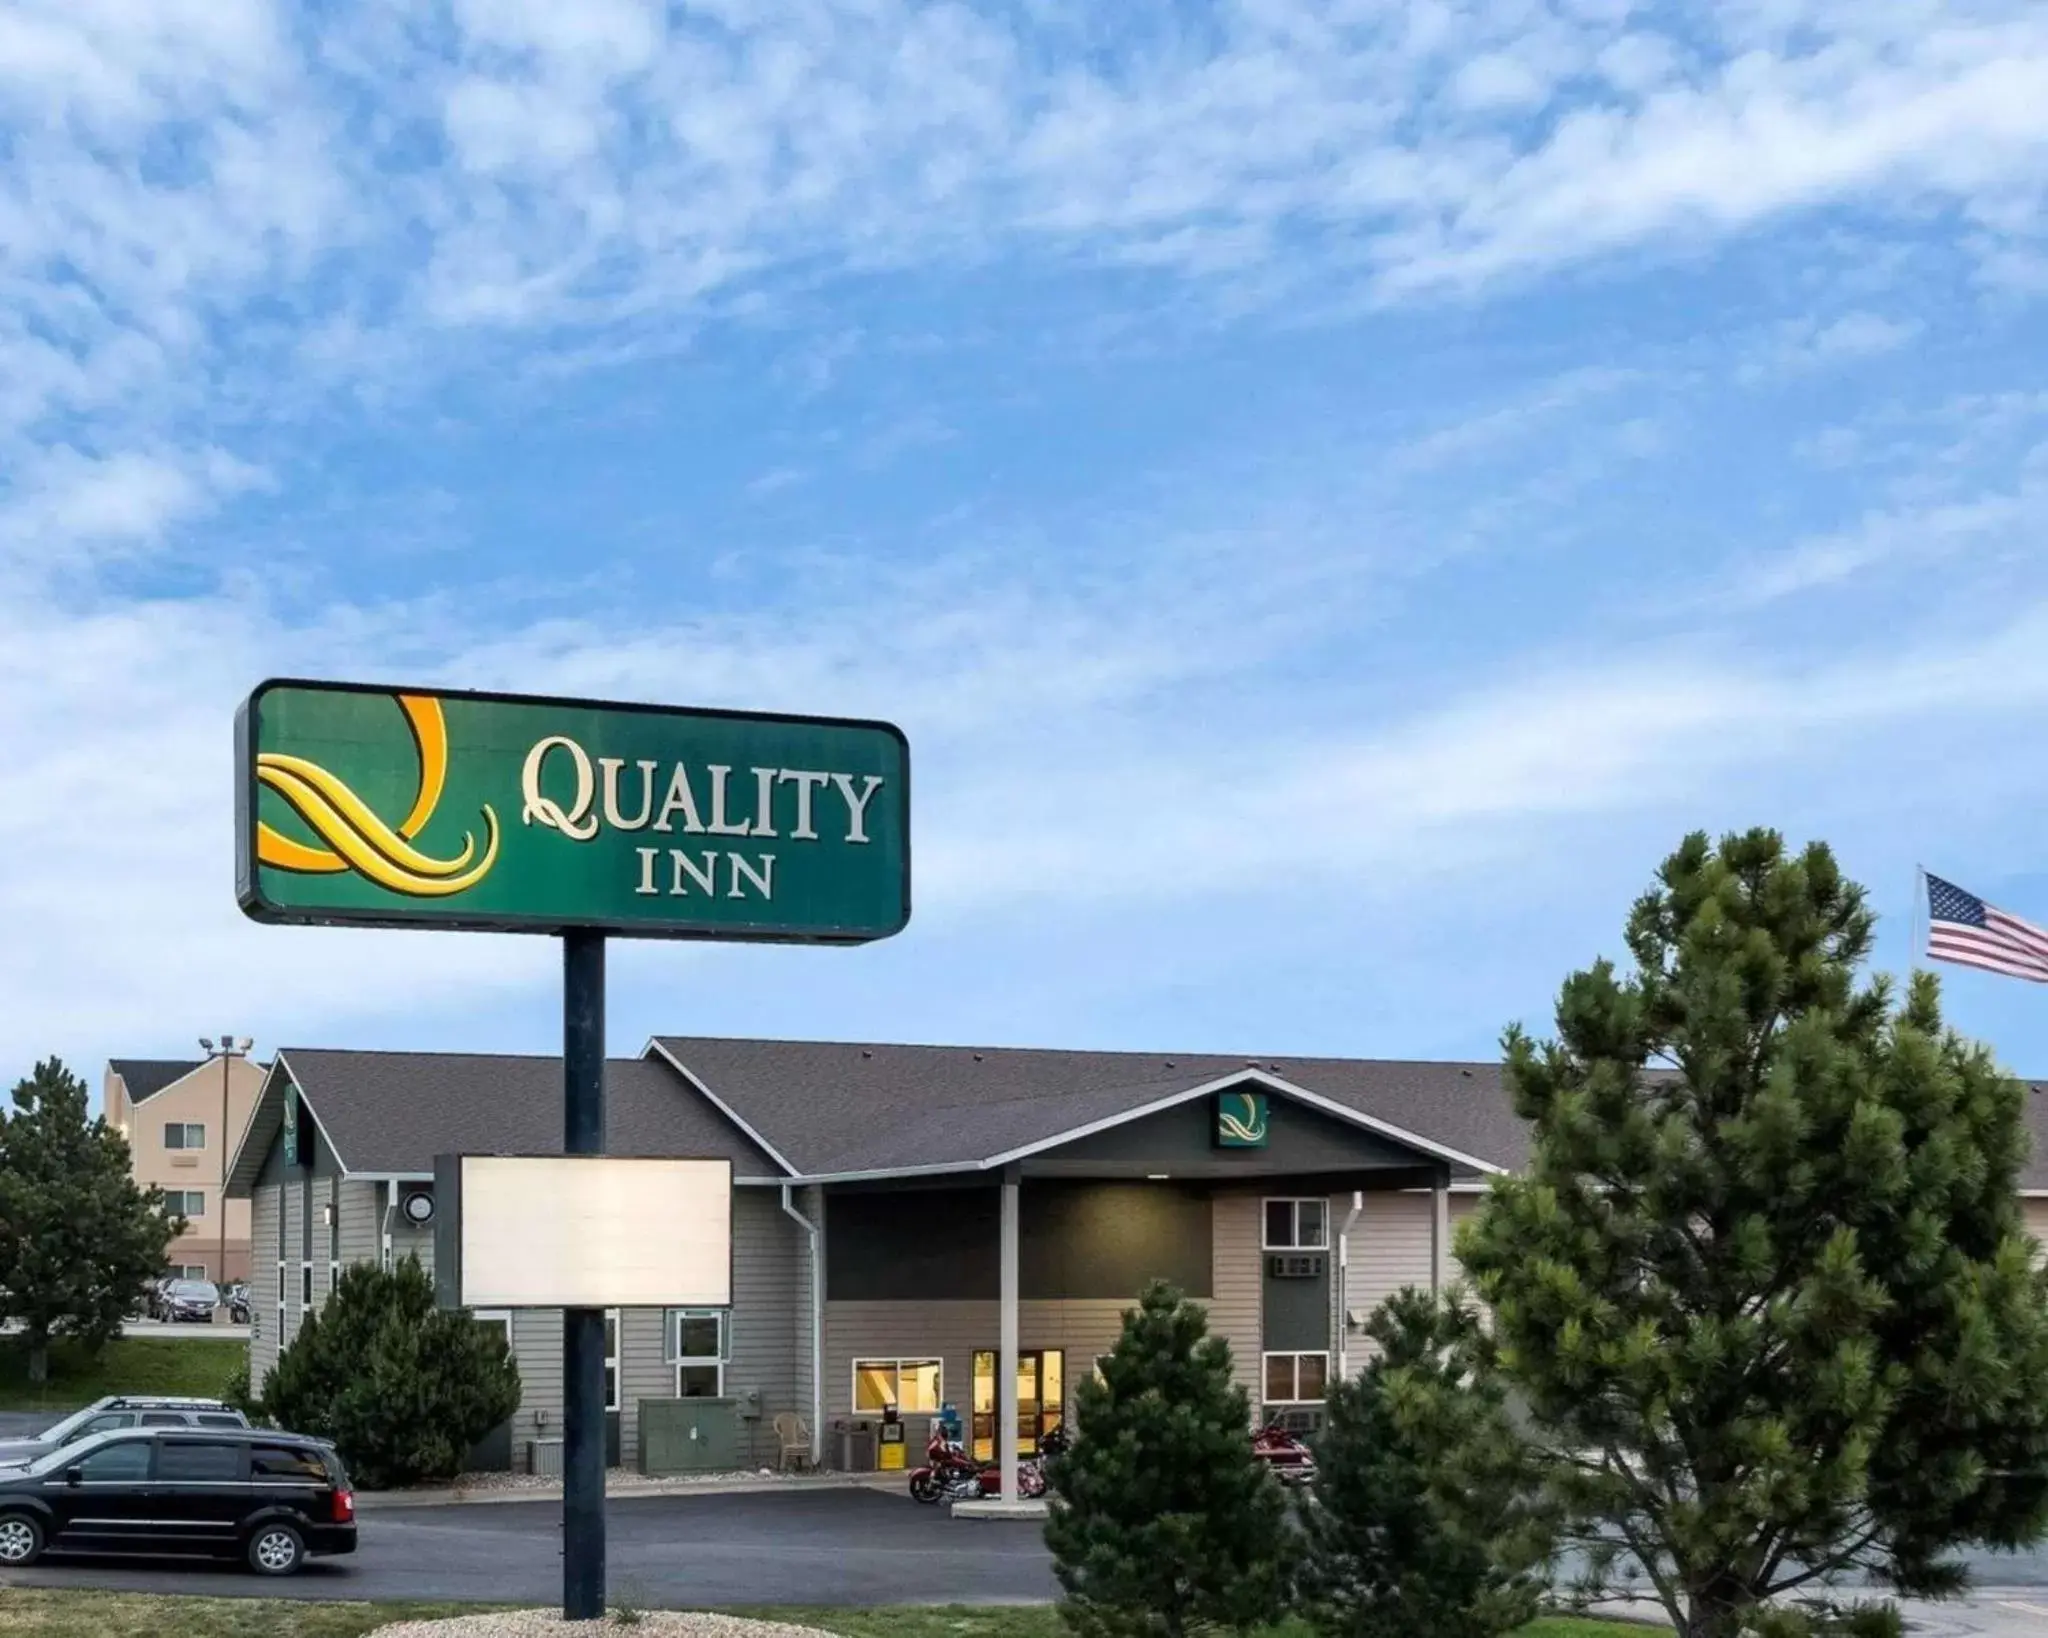 Property building in Quality Inn Spearfish